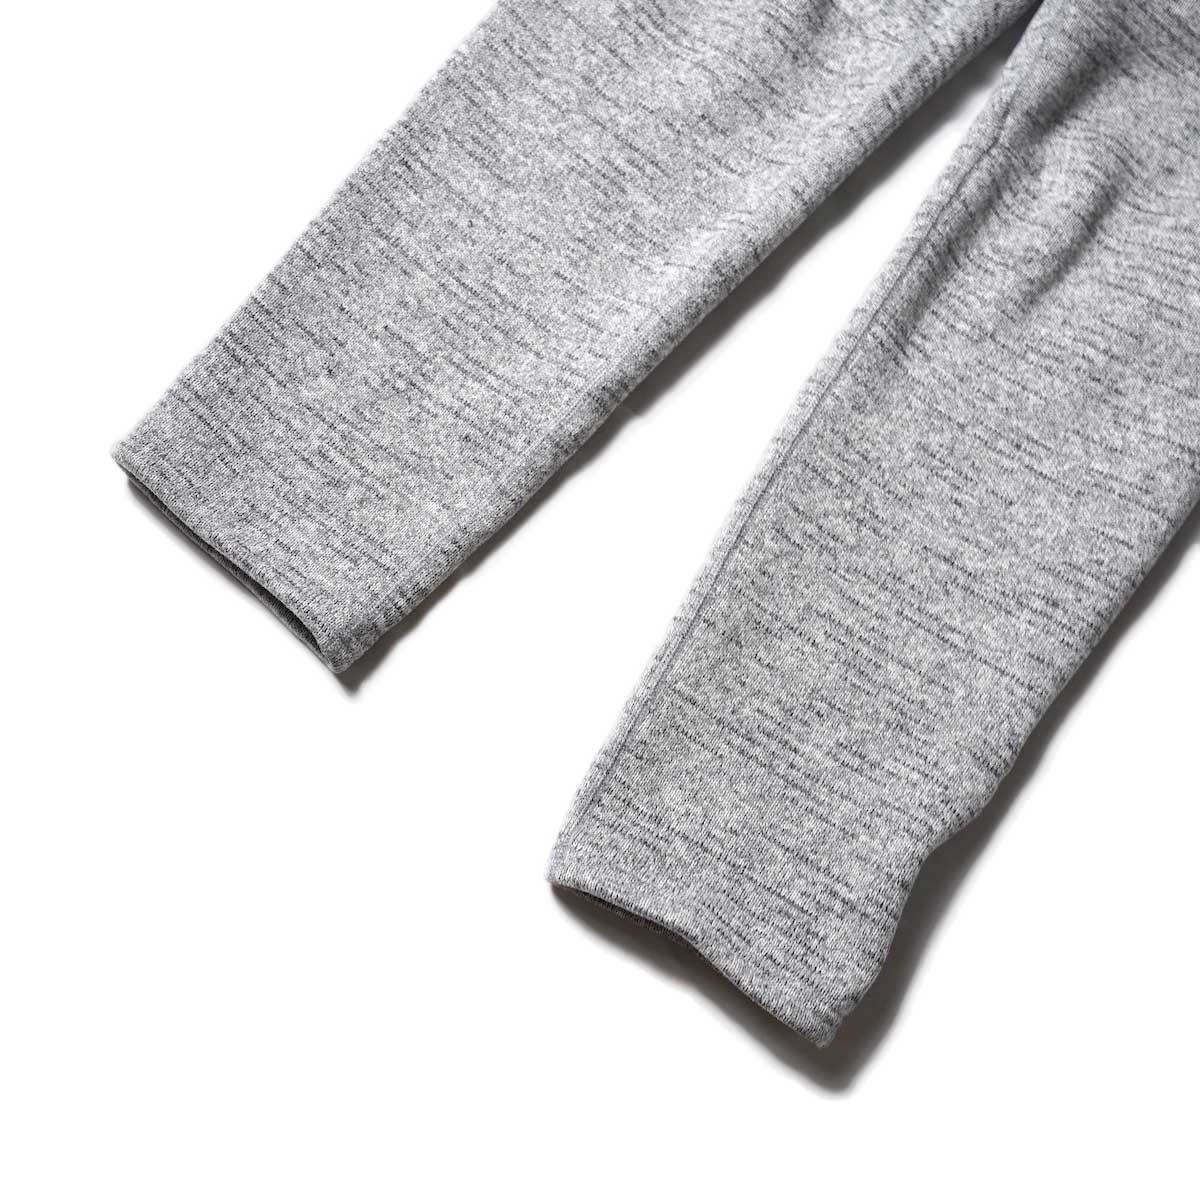 South2 West8 / 2P Cycle Pant - POLARTEC Fleece Lined Jersey (Grey)裾